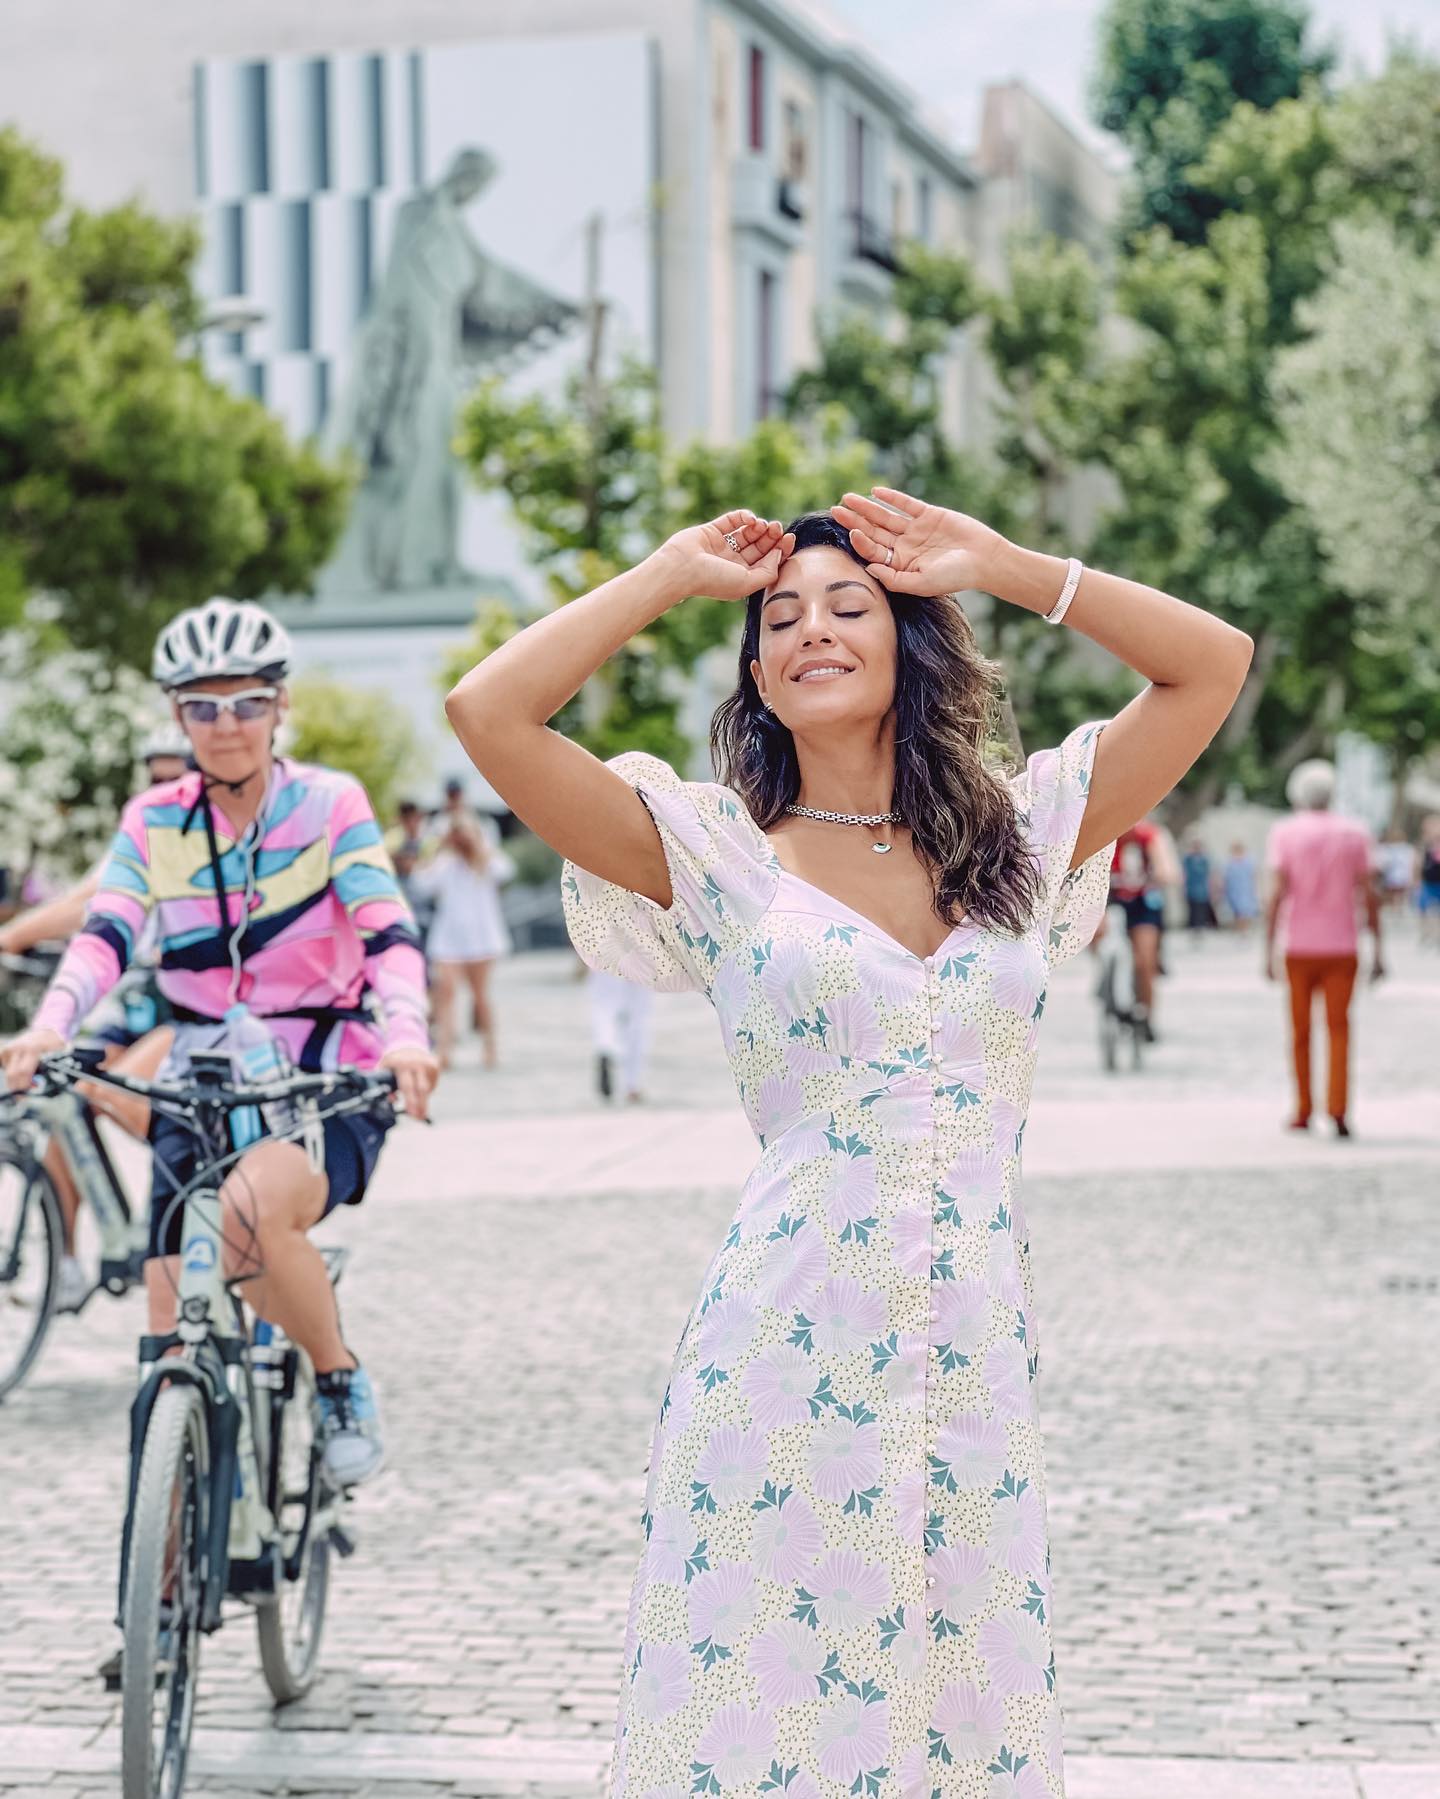 Photo shared by Evgenia Samara on June 13 2023 tagging @tedbaker. May be an image of 3 people bicycle headscarf scooter dress sundress and outdoors